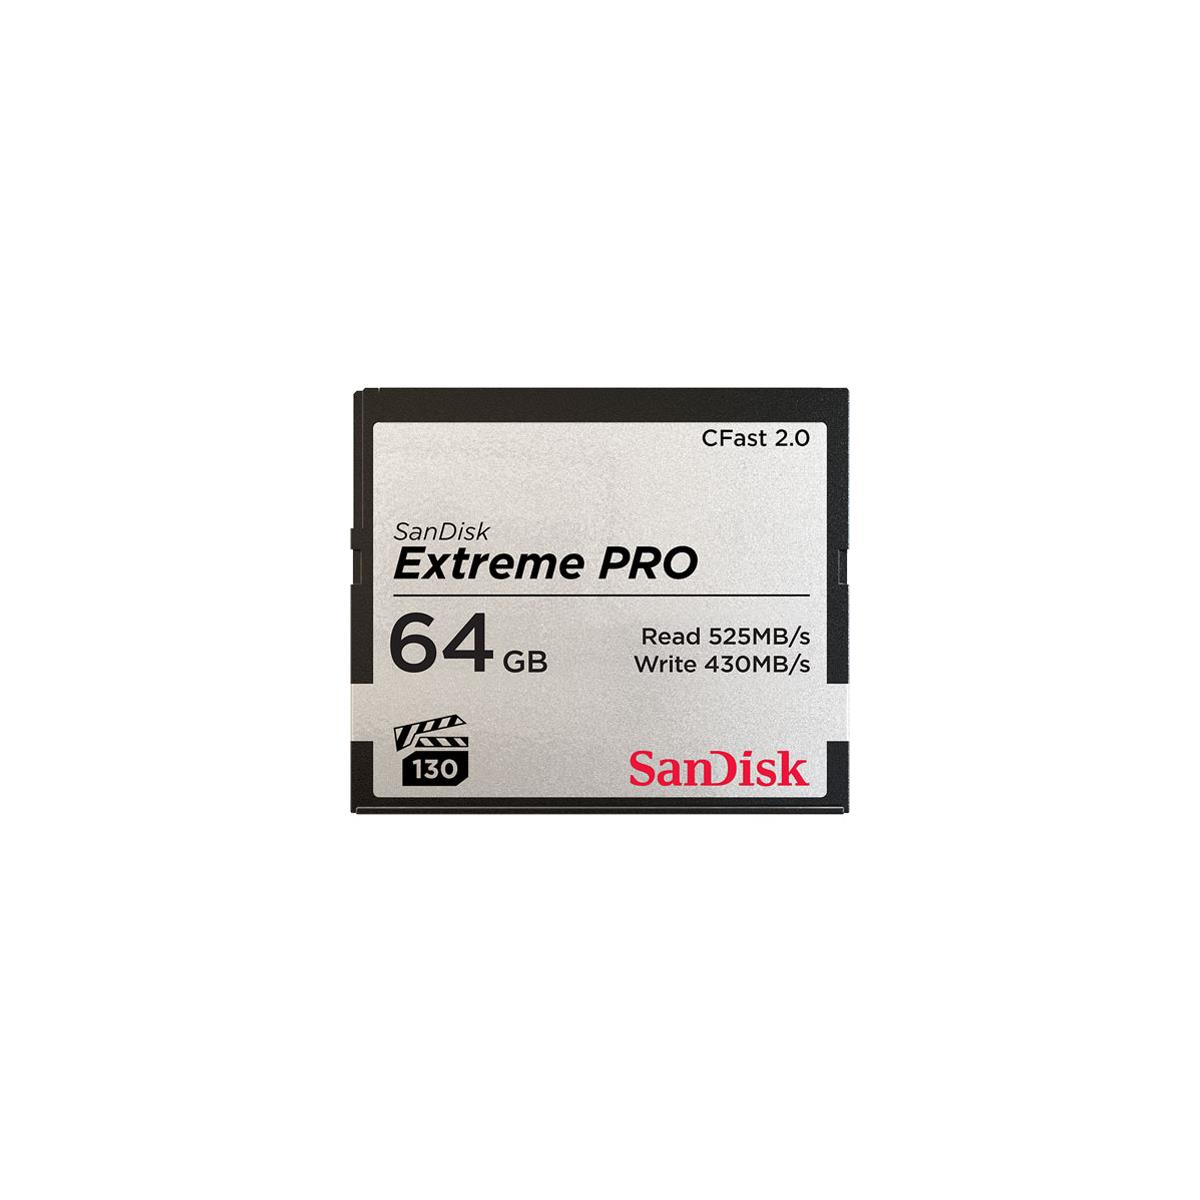 Image of SanDisk Extreme PRO 64GB CFast 2.0 Memory Card